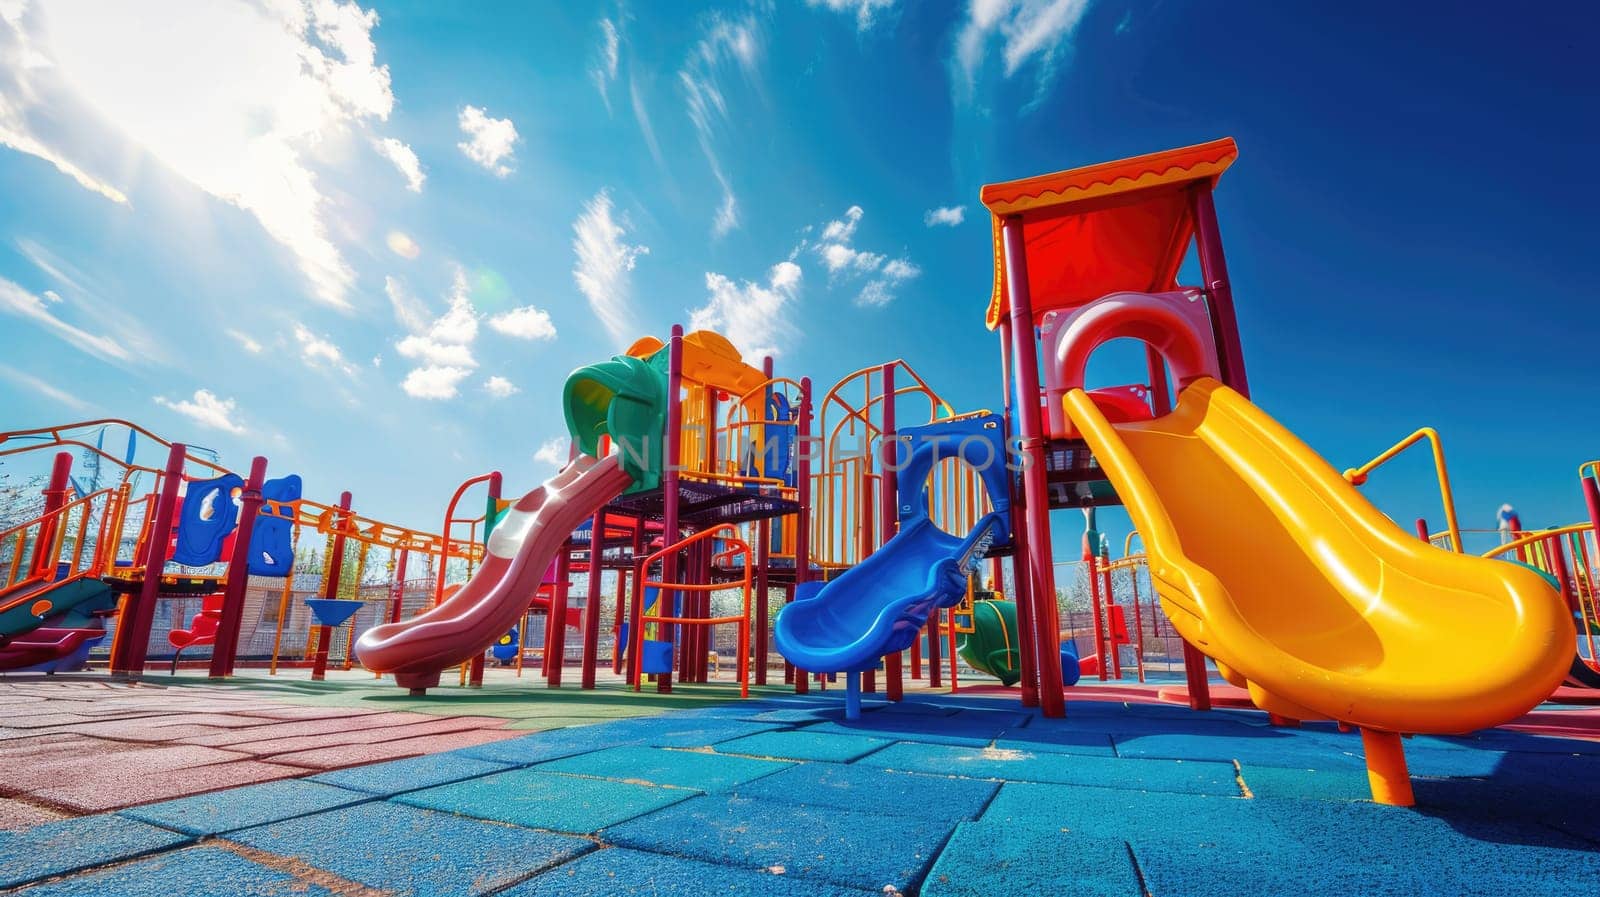 Young children enjoy a sunny day playing on vibrant playground equipment in a park with slides and climbing structures. Resplendent.